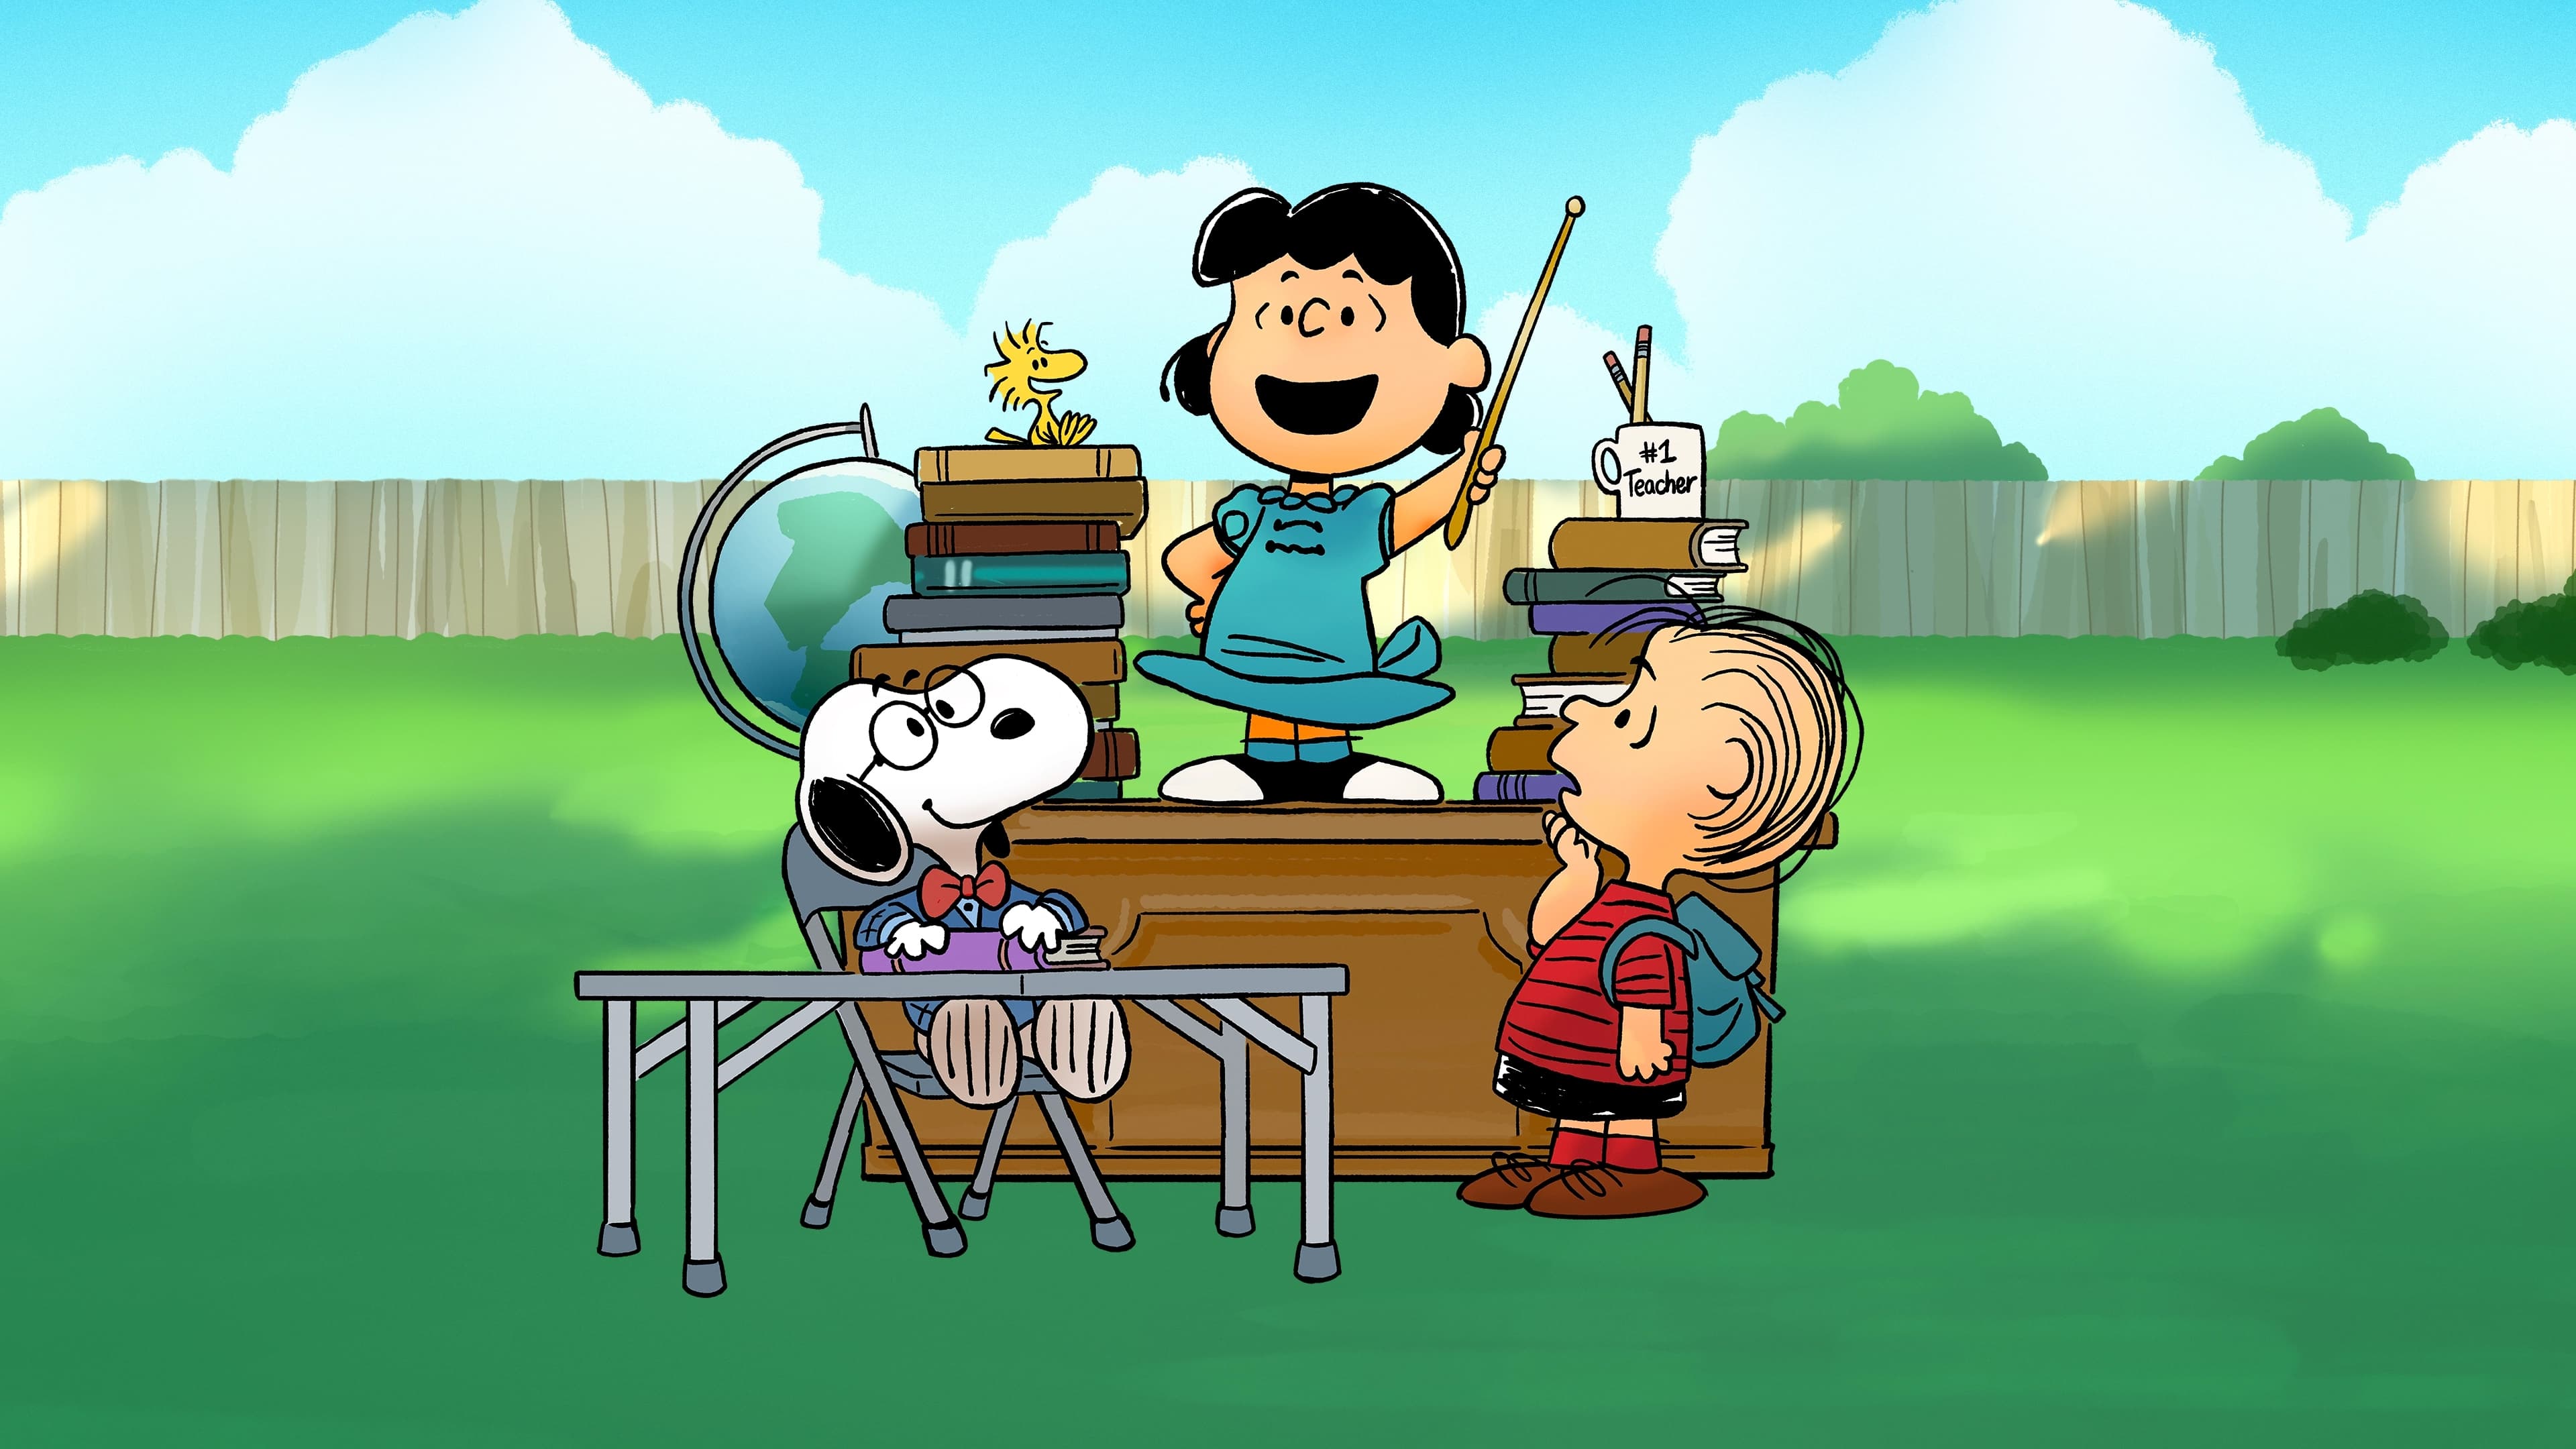 Snoopy: Trường Học Của Lucy - Snoopy Presents: Lucy's School